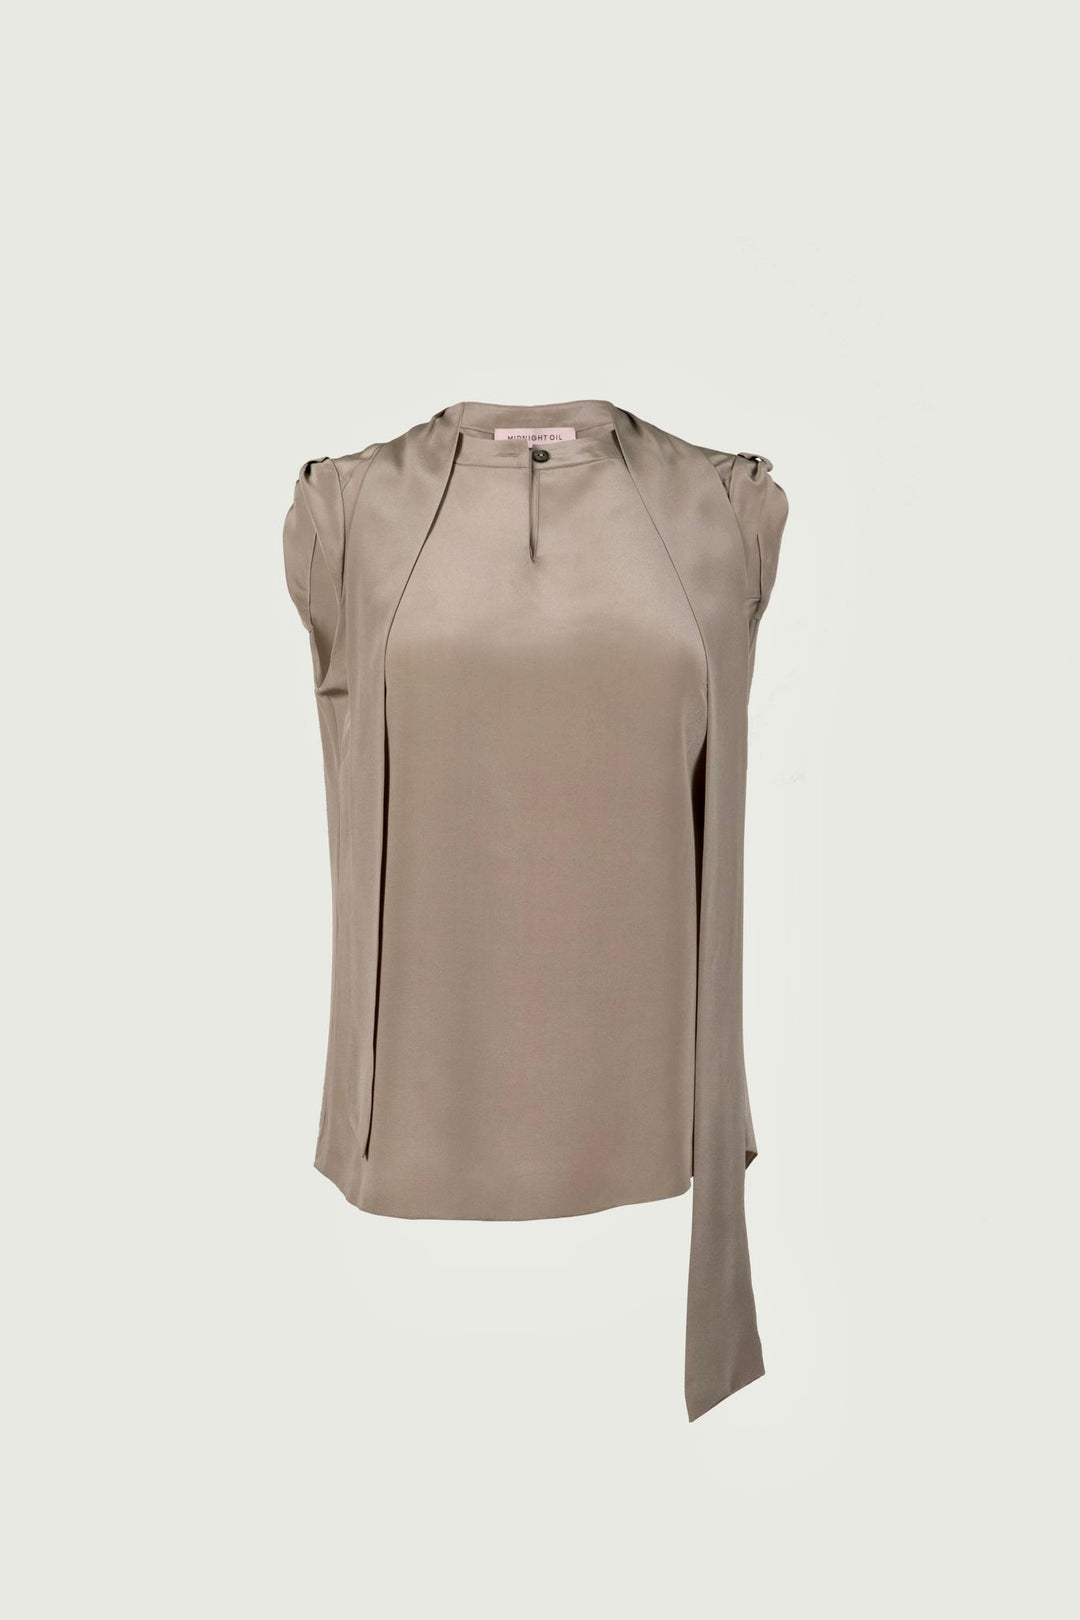 Cap Sleeve Blouse - Crepe de Chine - Milano Taupe - NEW!